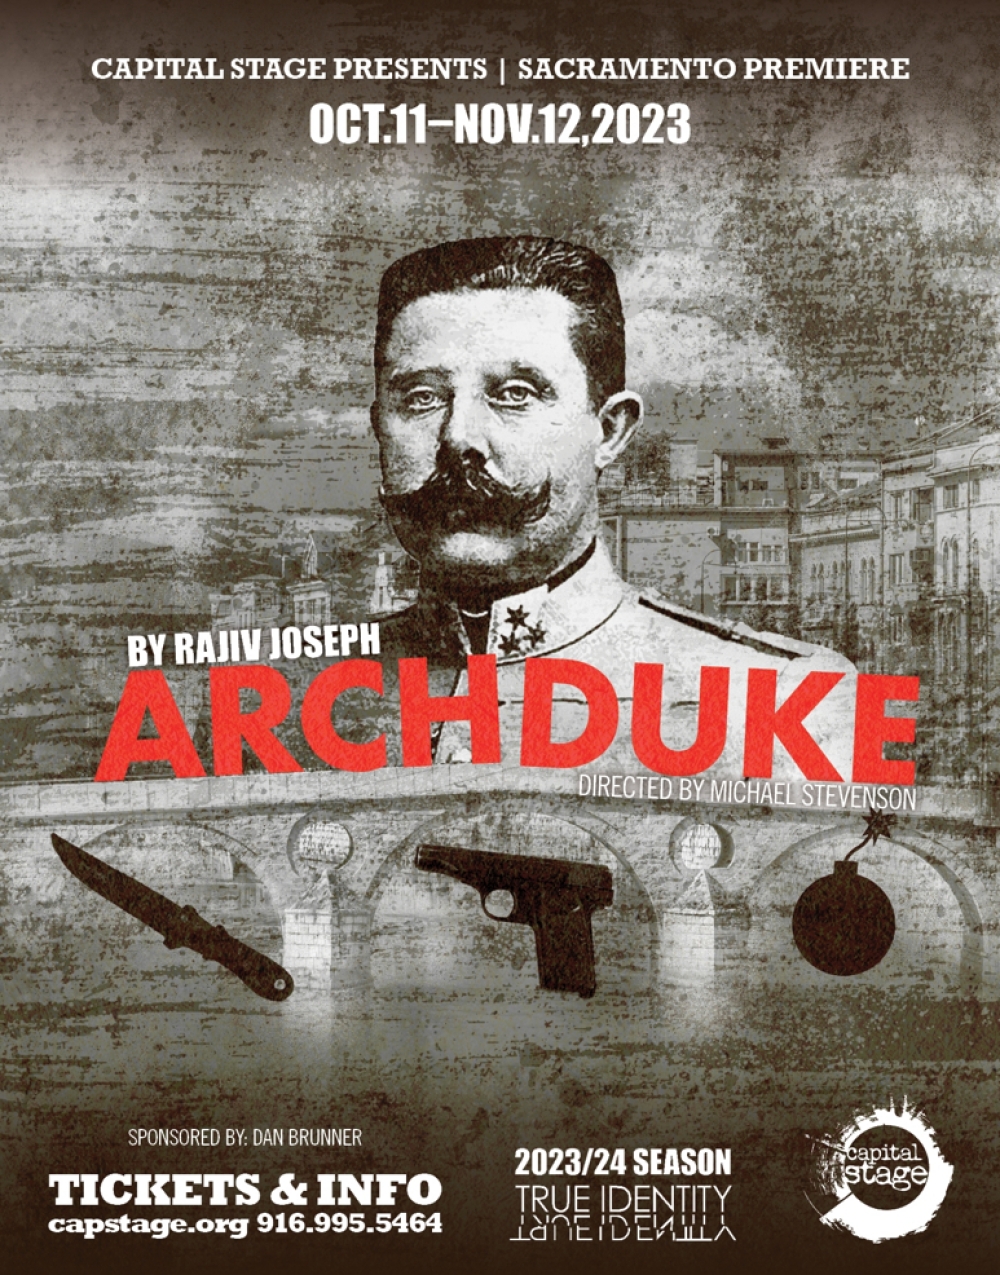 Archduke at Capital Stage